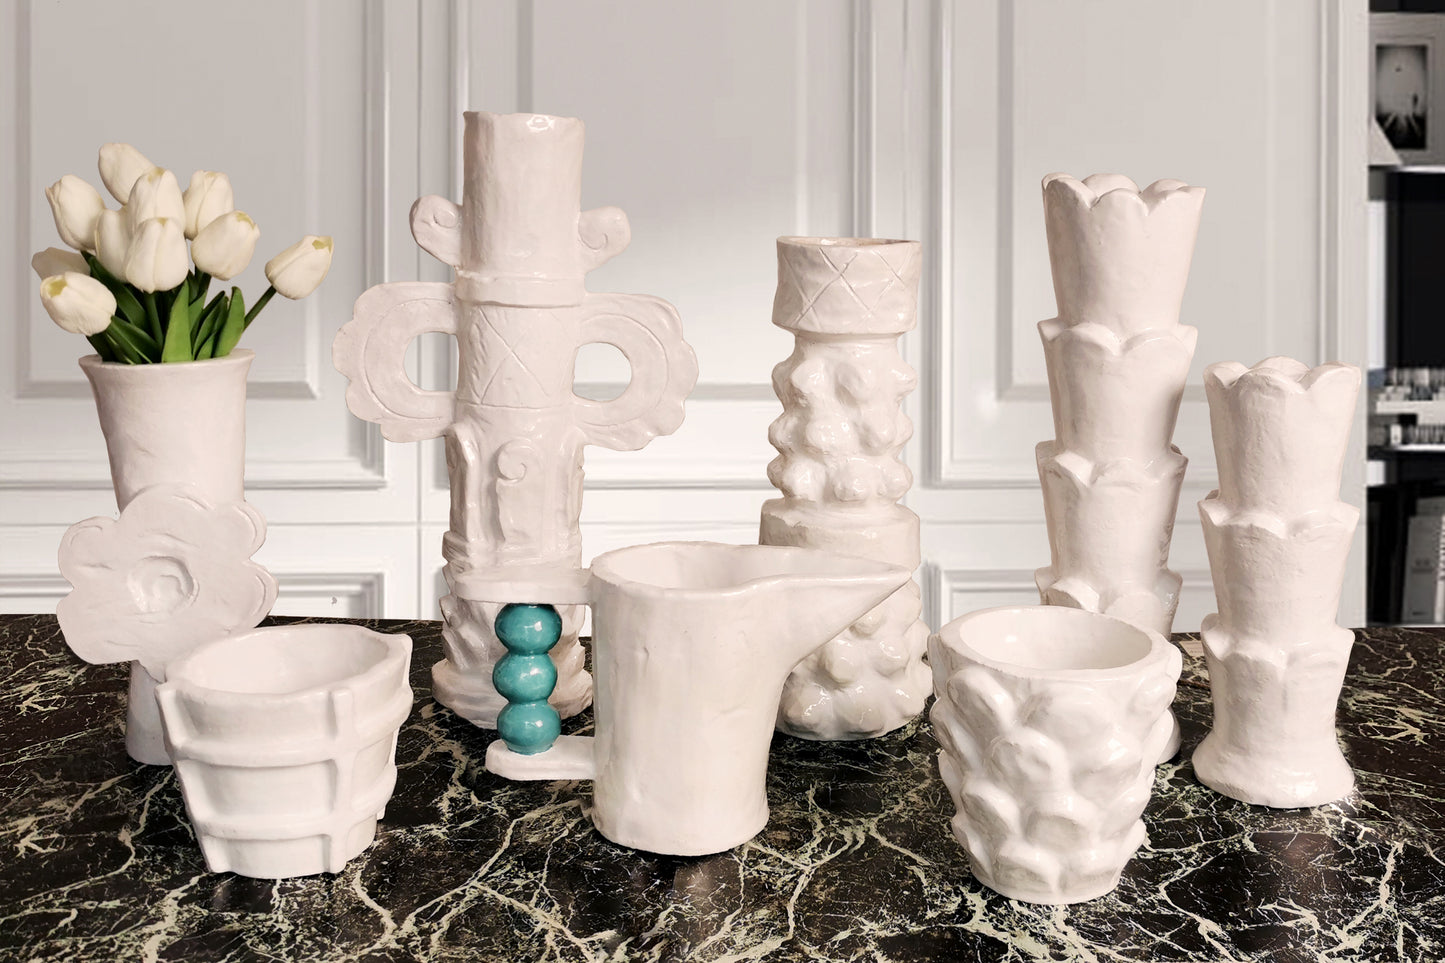 Objects designed by Bela Silva exclusively for Waww